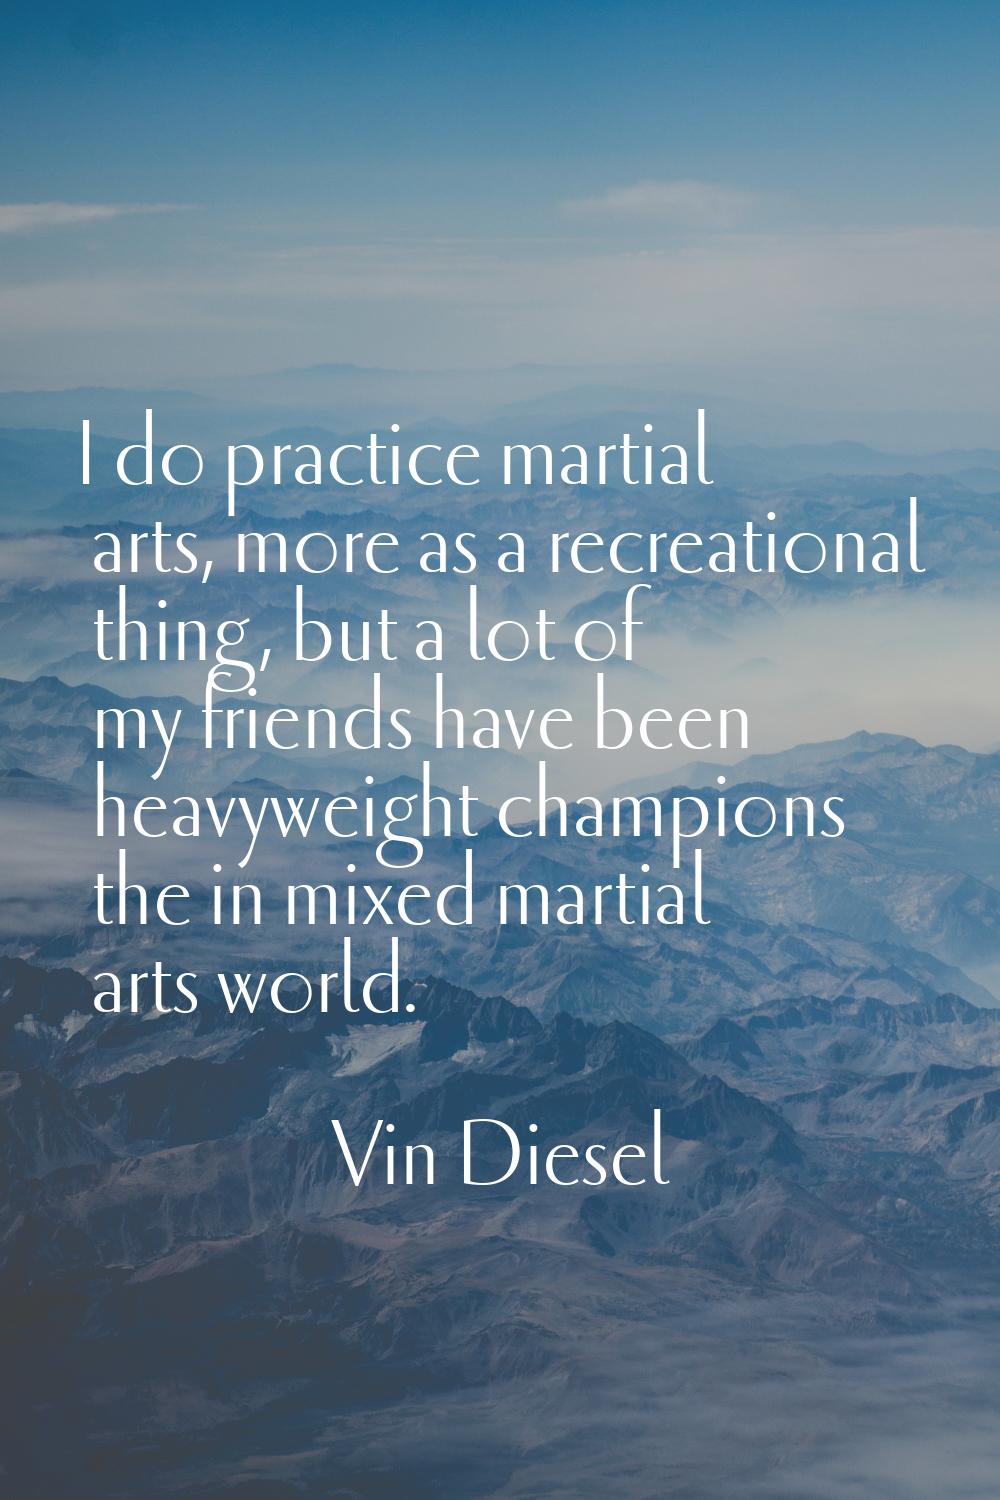 I do practice martial arts, more as a recreational thing, but a lot of my friends have been heavywe